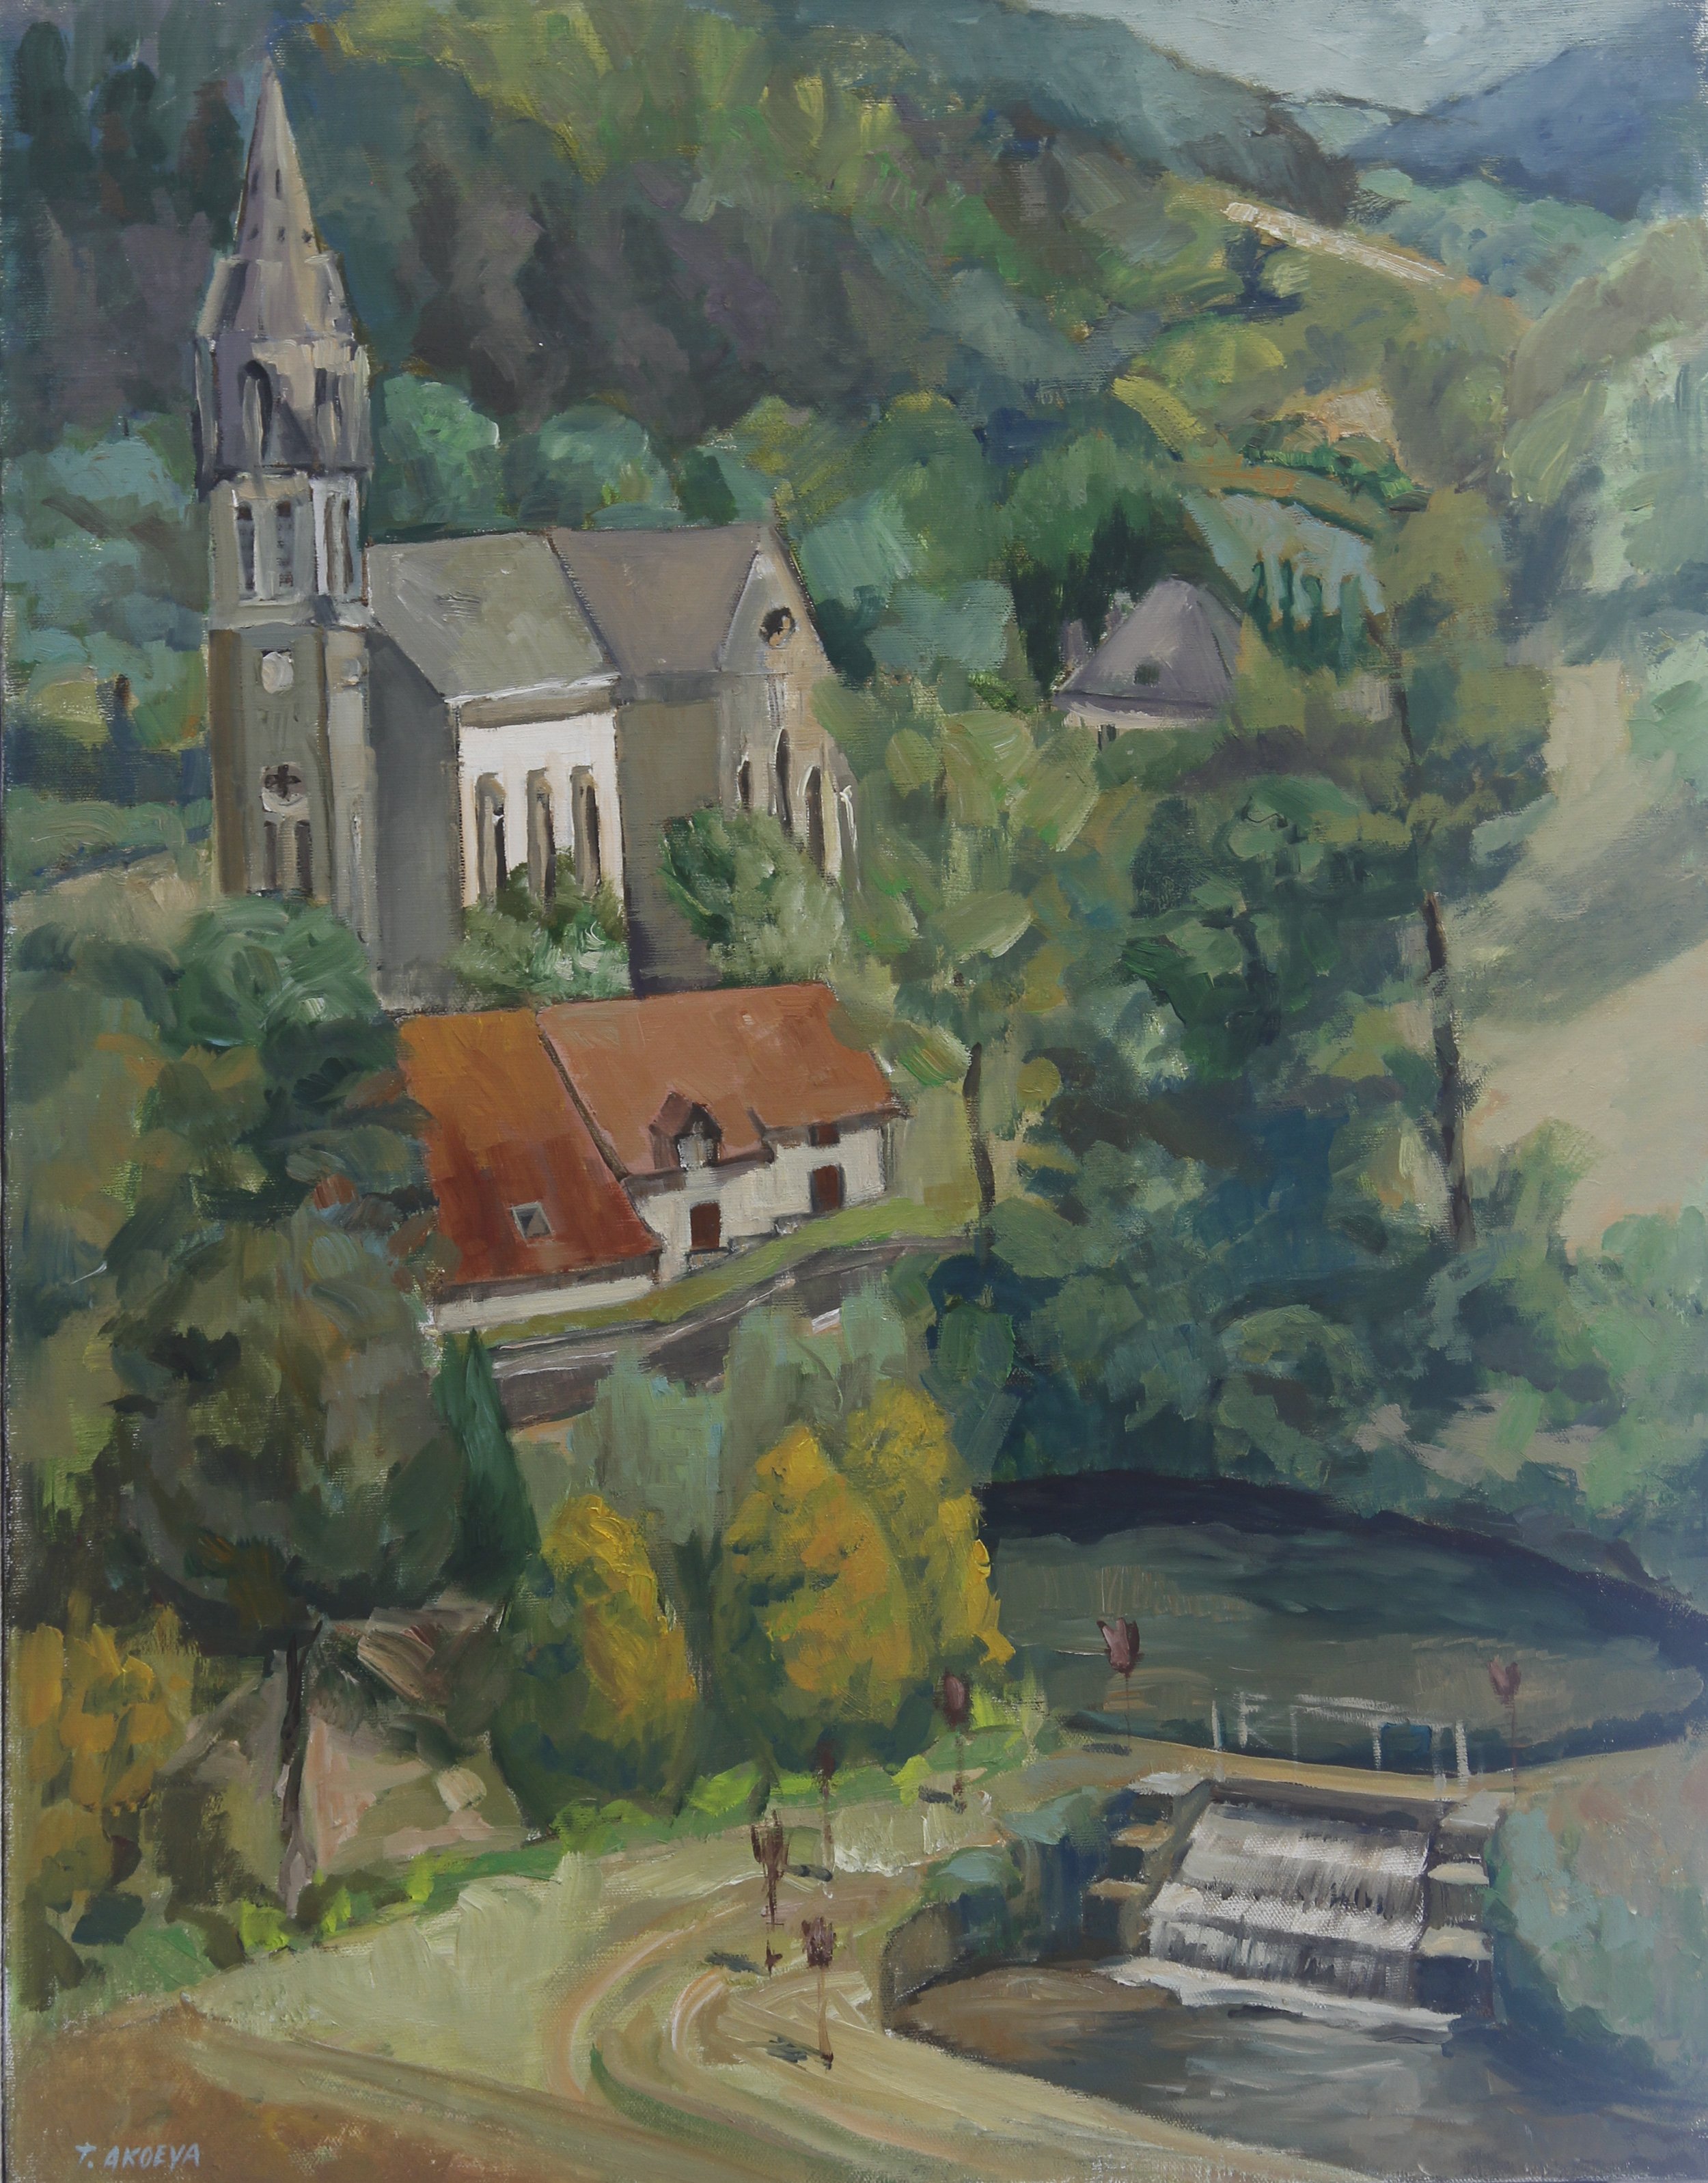 Eglise St. Andre at Orquevaux, France, 2023. Oil on linen, 28x22 inches.